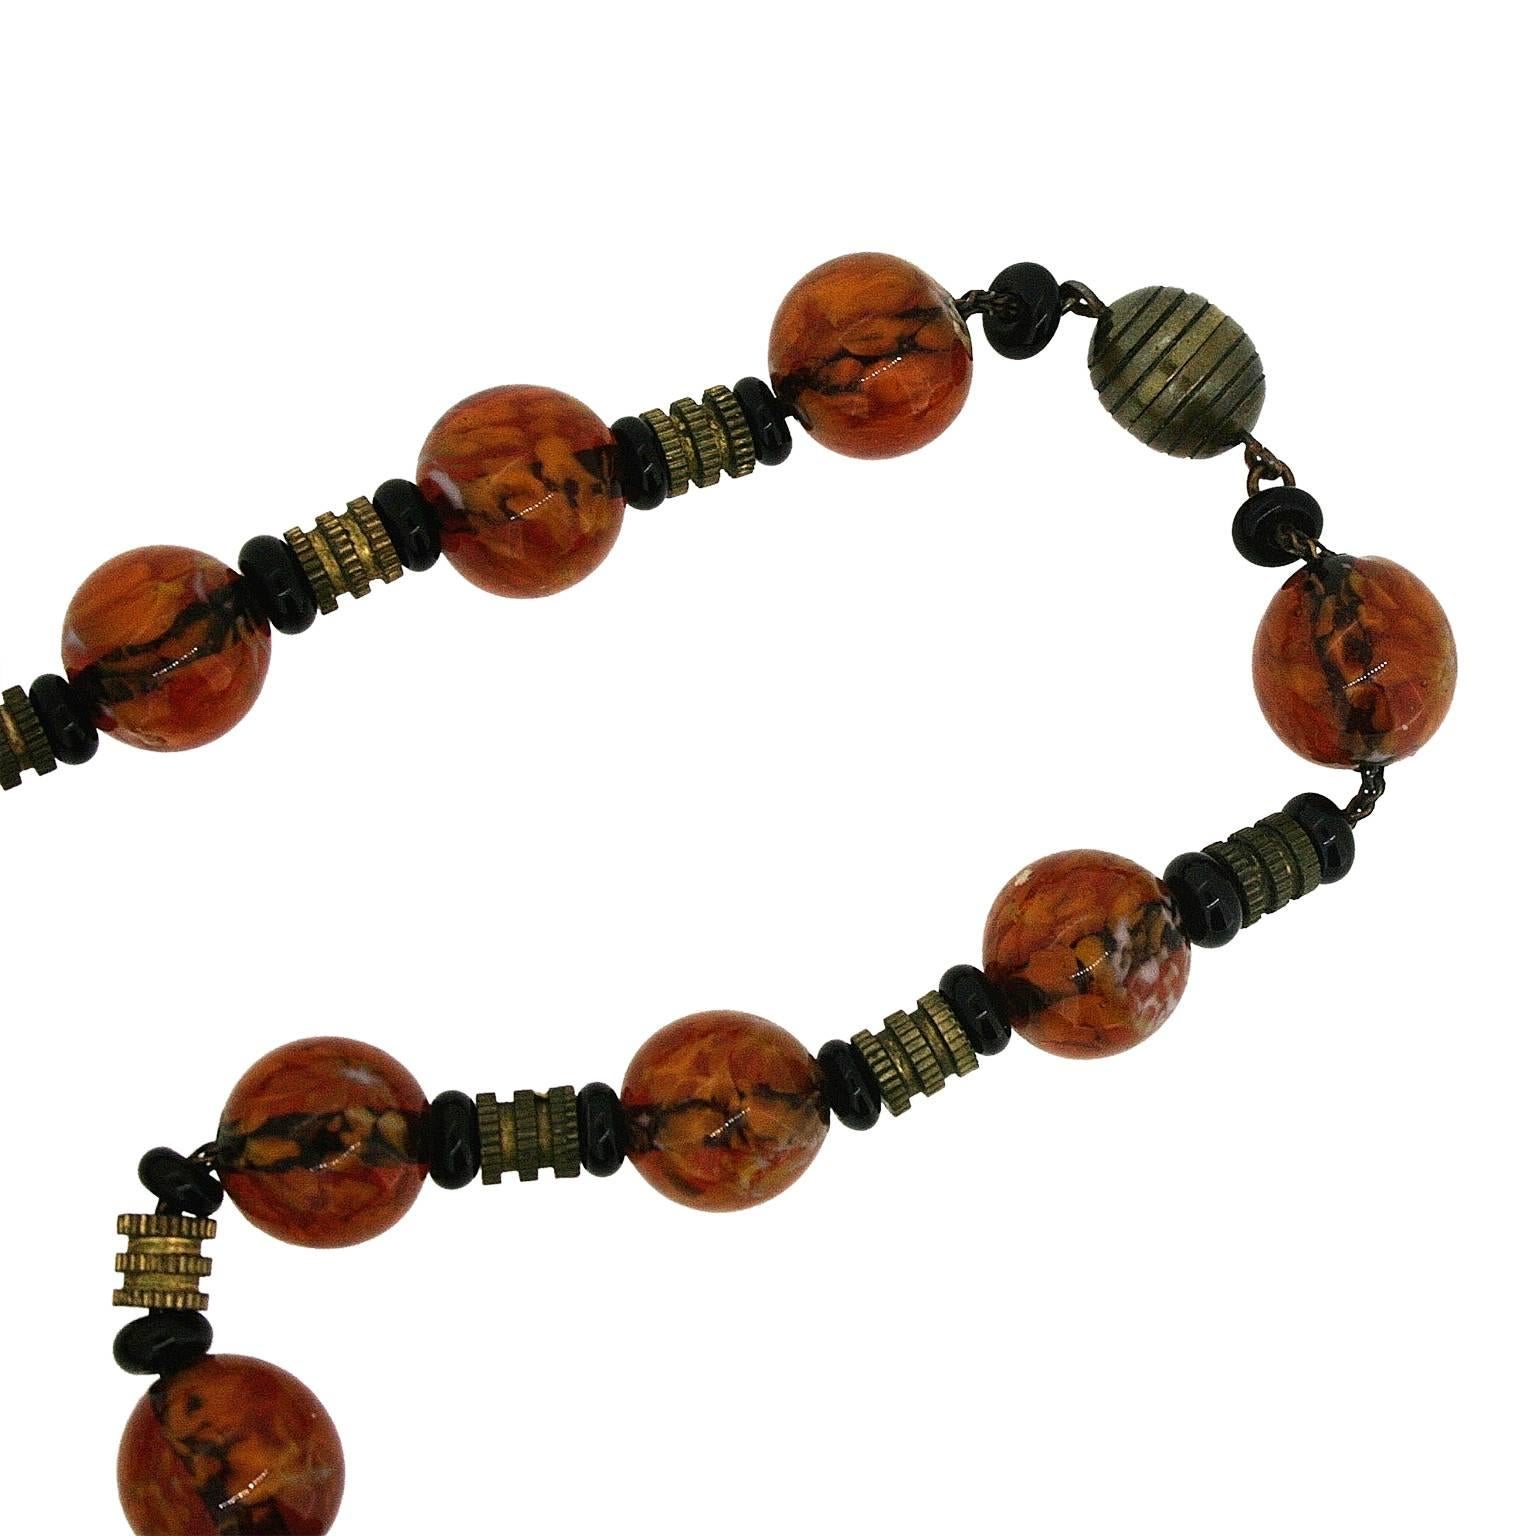 Art Deco 1930s Czechoslovakian Marbled Amber Glass and Wooden Bead Vintage Necklace For Sale